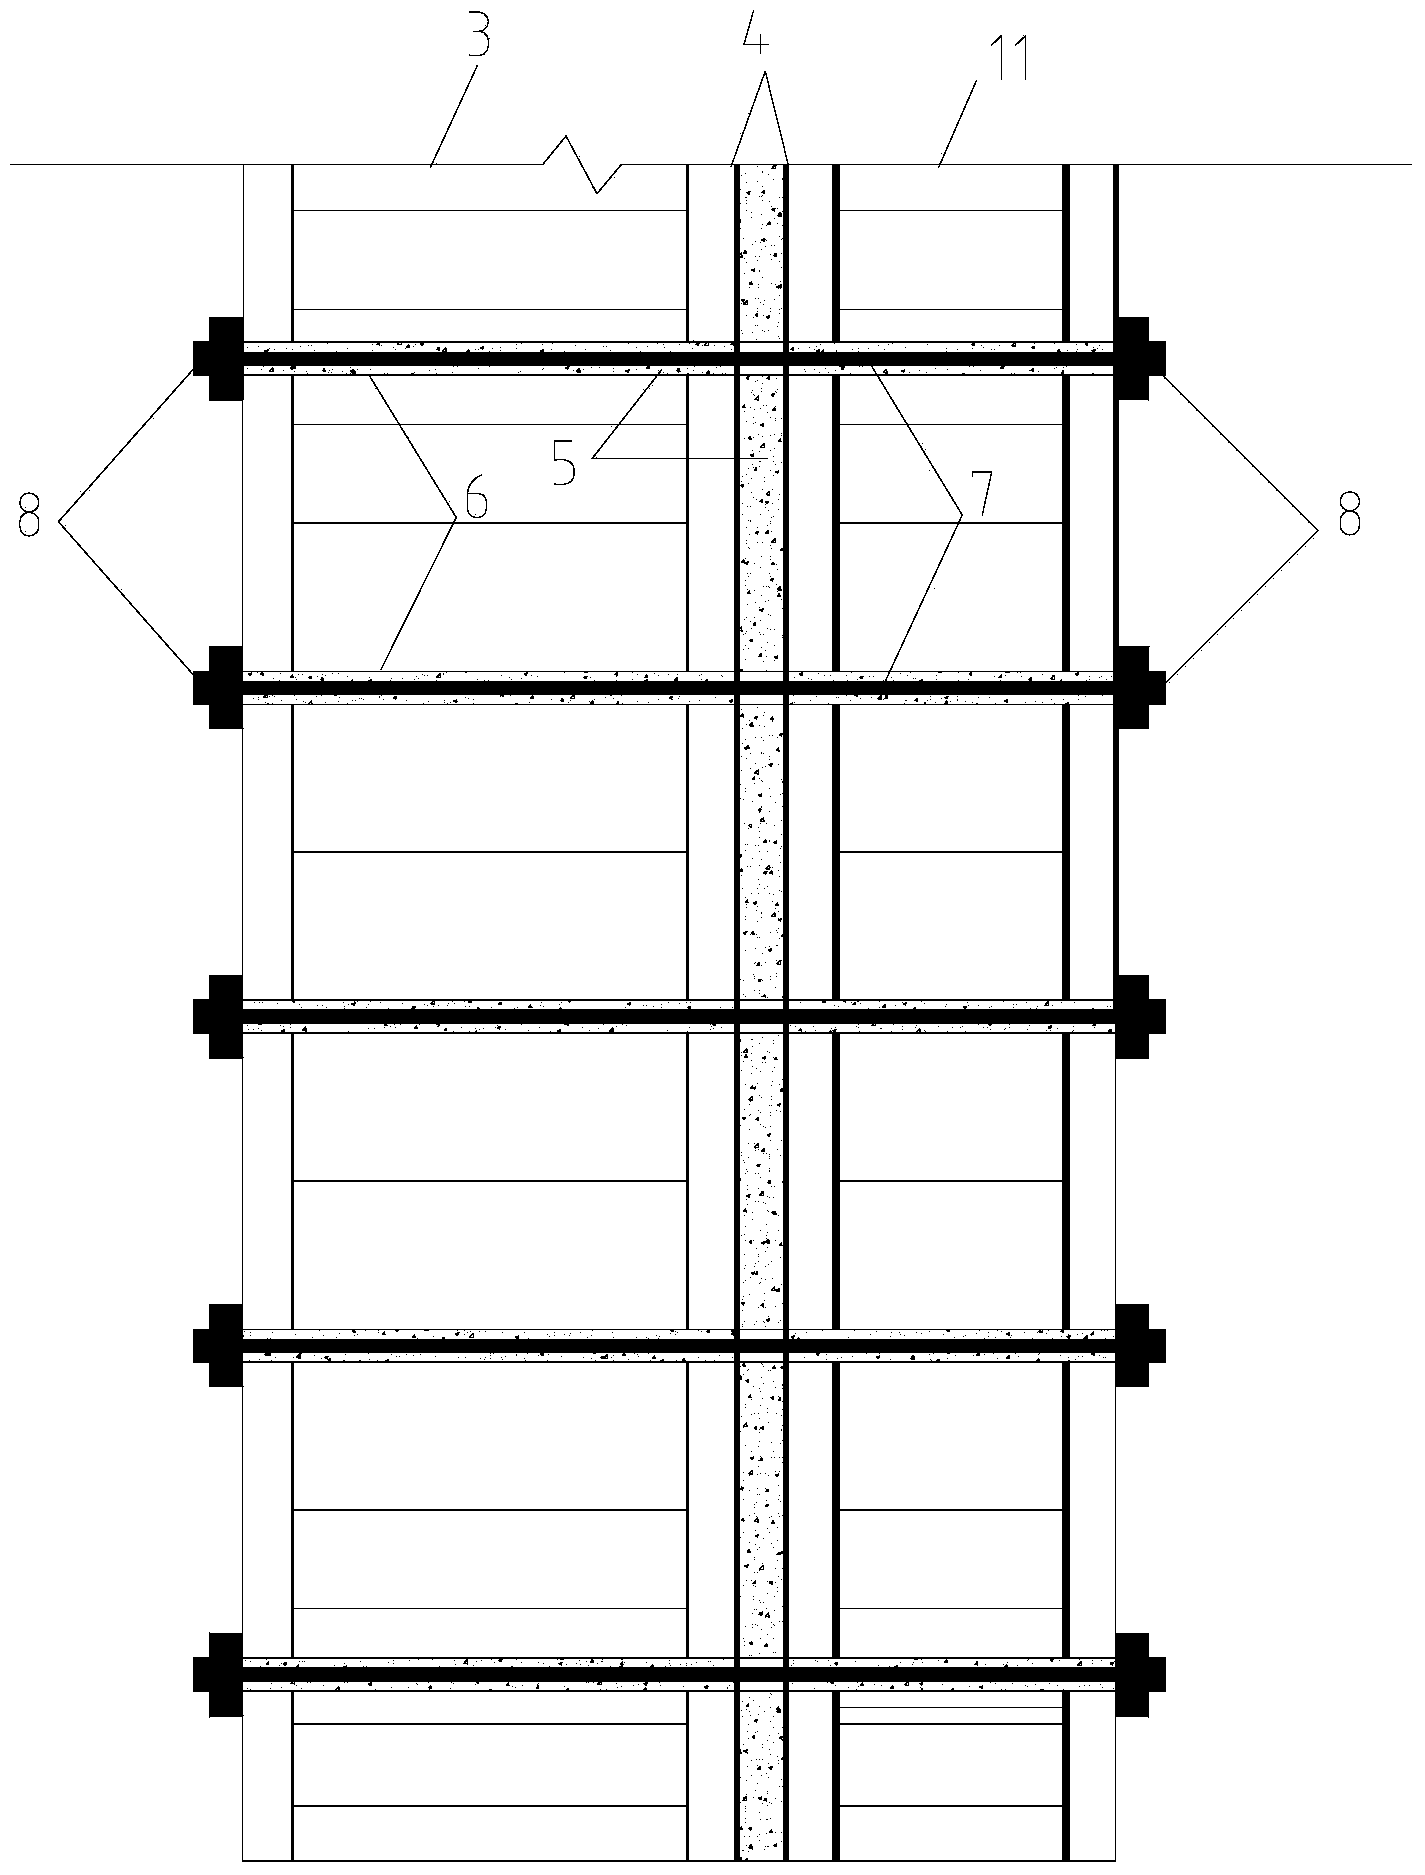 Method for using prefabricated reinforced concrete frame to reinforce existing structure through prestressing assembly